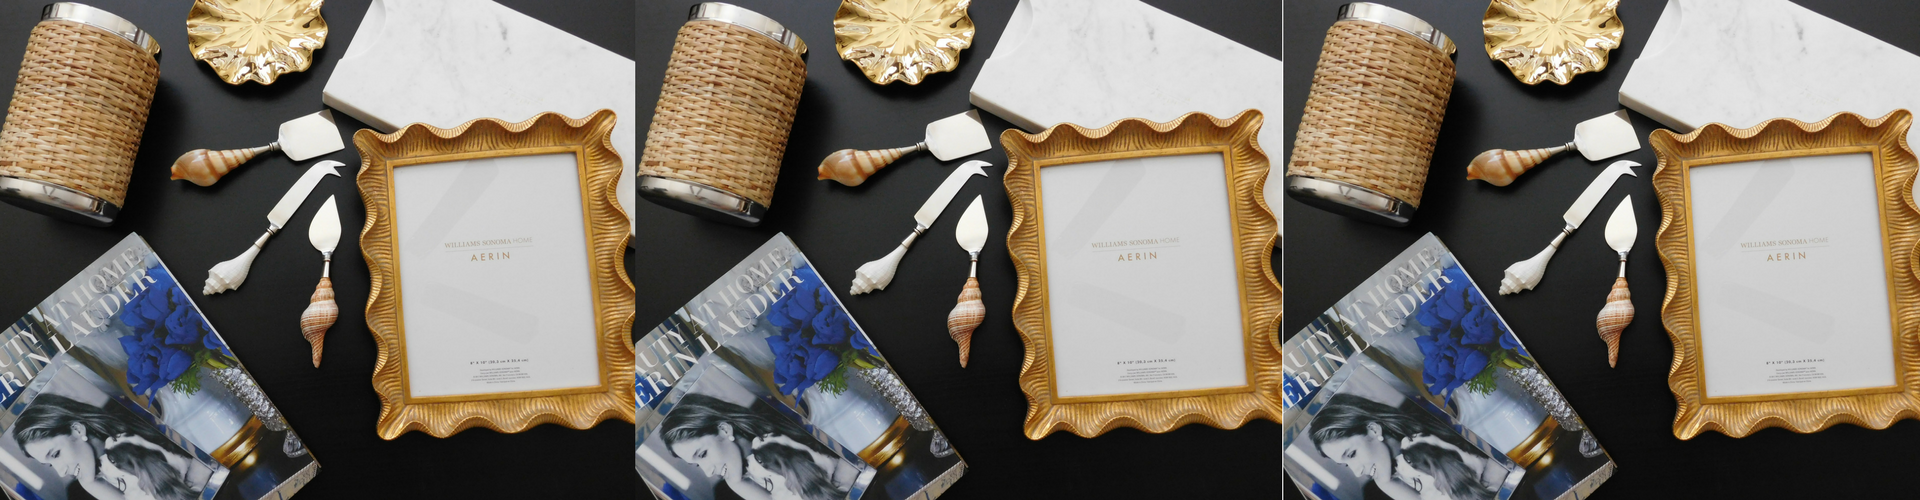 HAUTE TIP: The AERIN Collection is launching at Williams Sonoma!